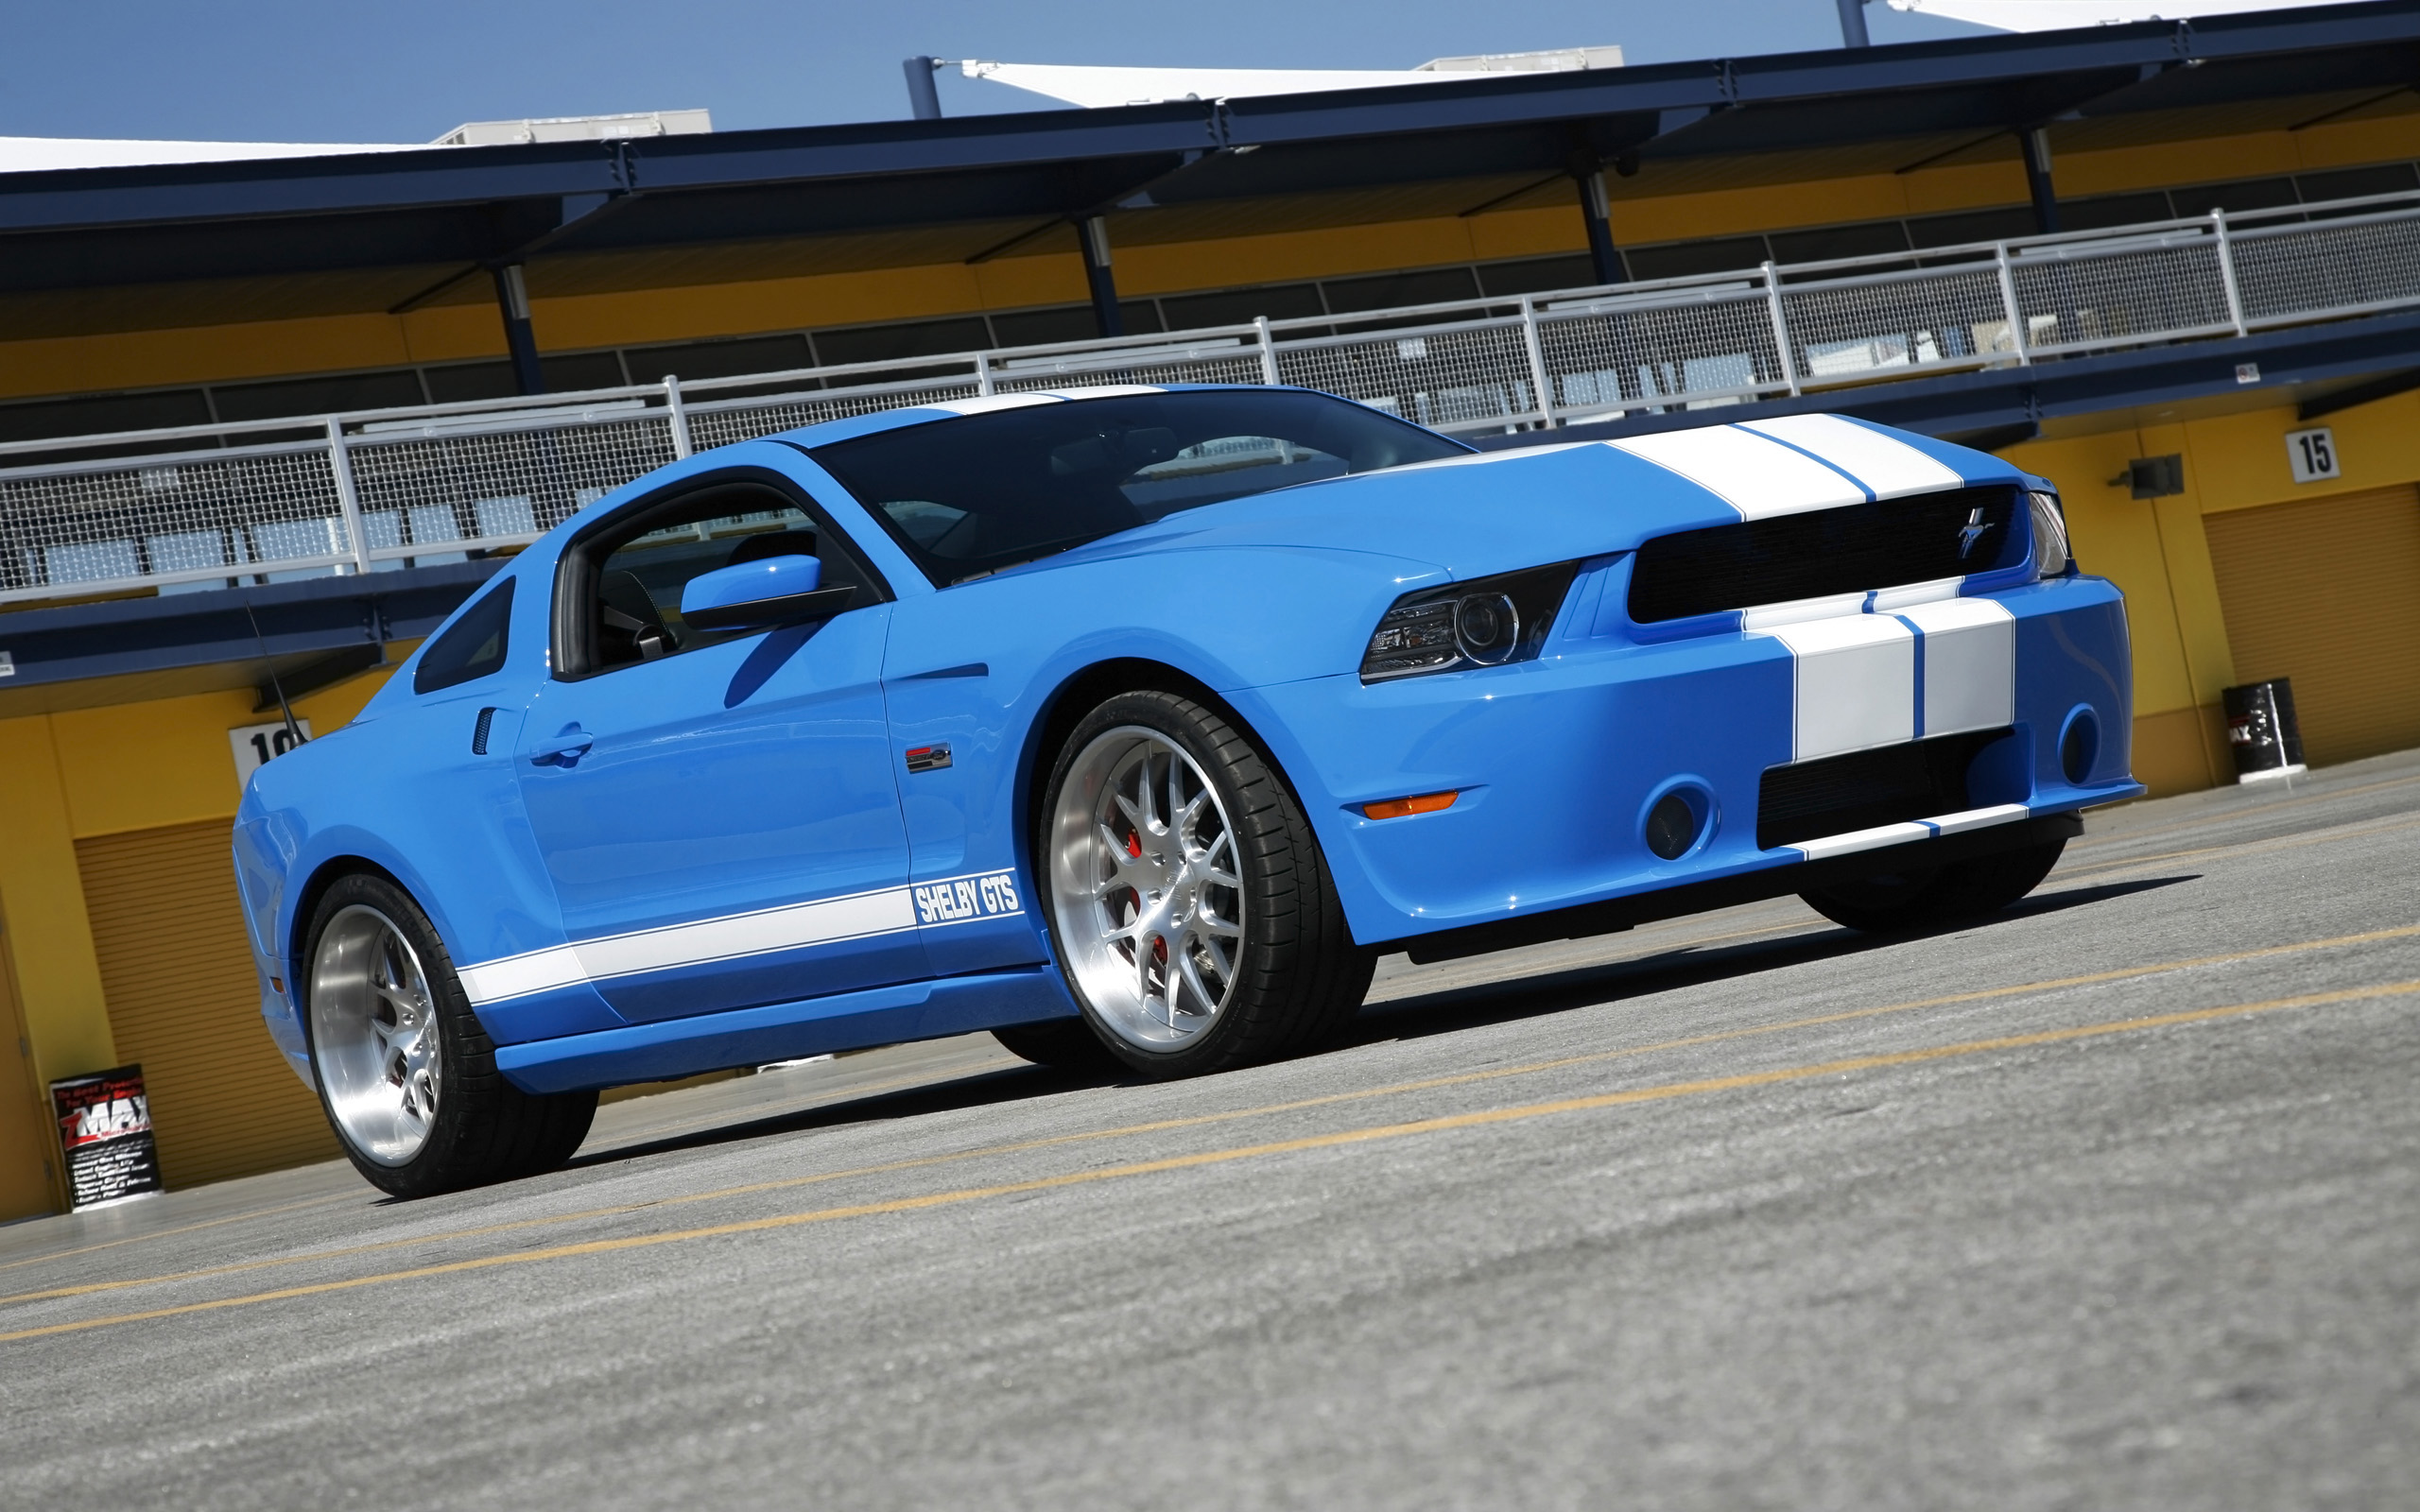 2013, Shelby, Gts, Ford, Mustang, Muscle, Supercar, Hg Wallpaper